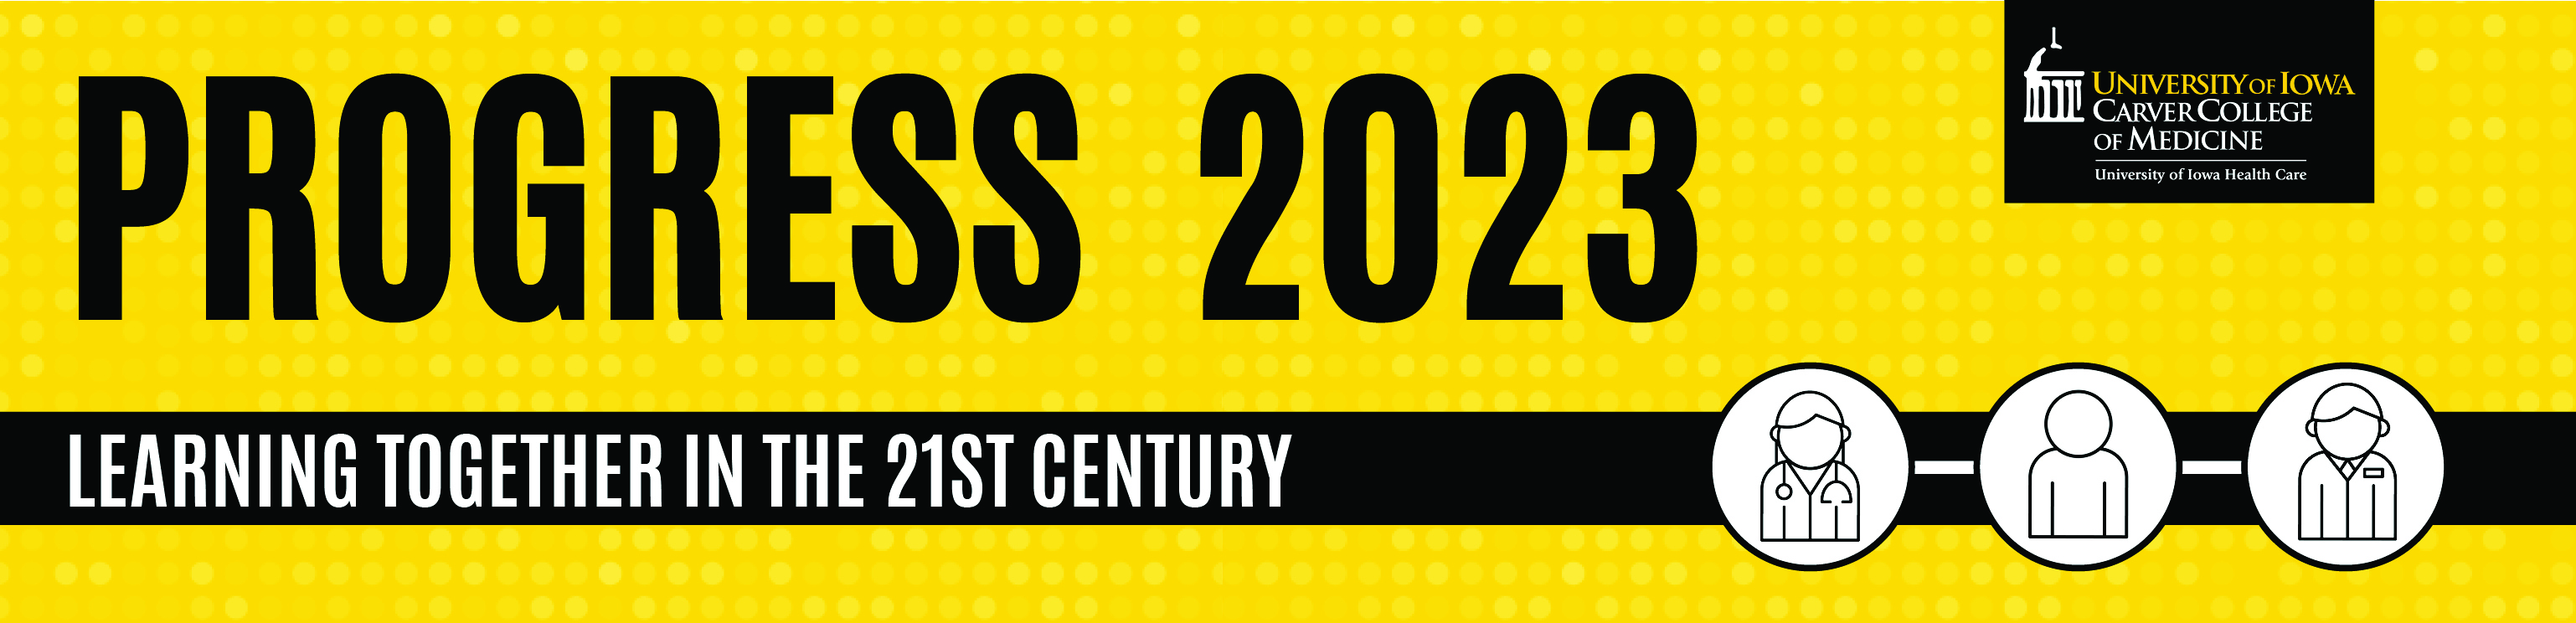 Progress 2023:  Learning Together in the 21st Century Banner